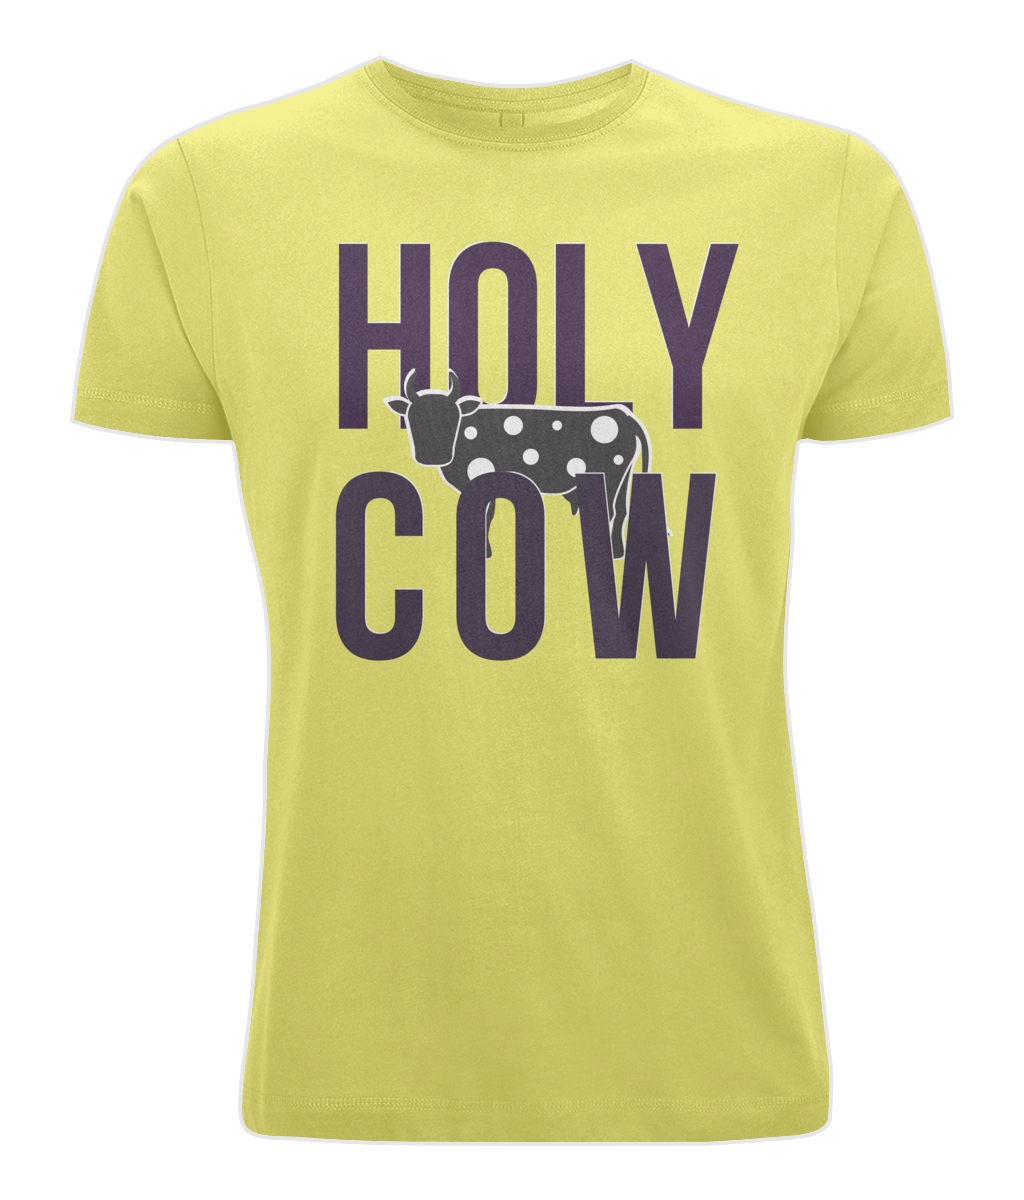 Hole-y Cow: Unisex Cotton Tee